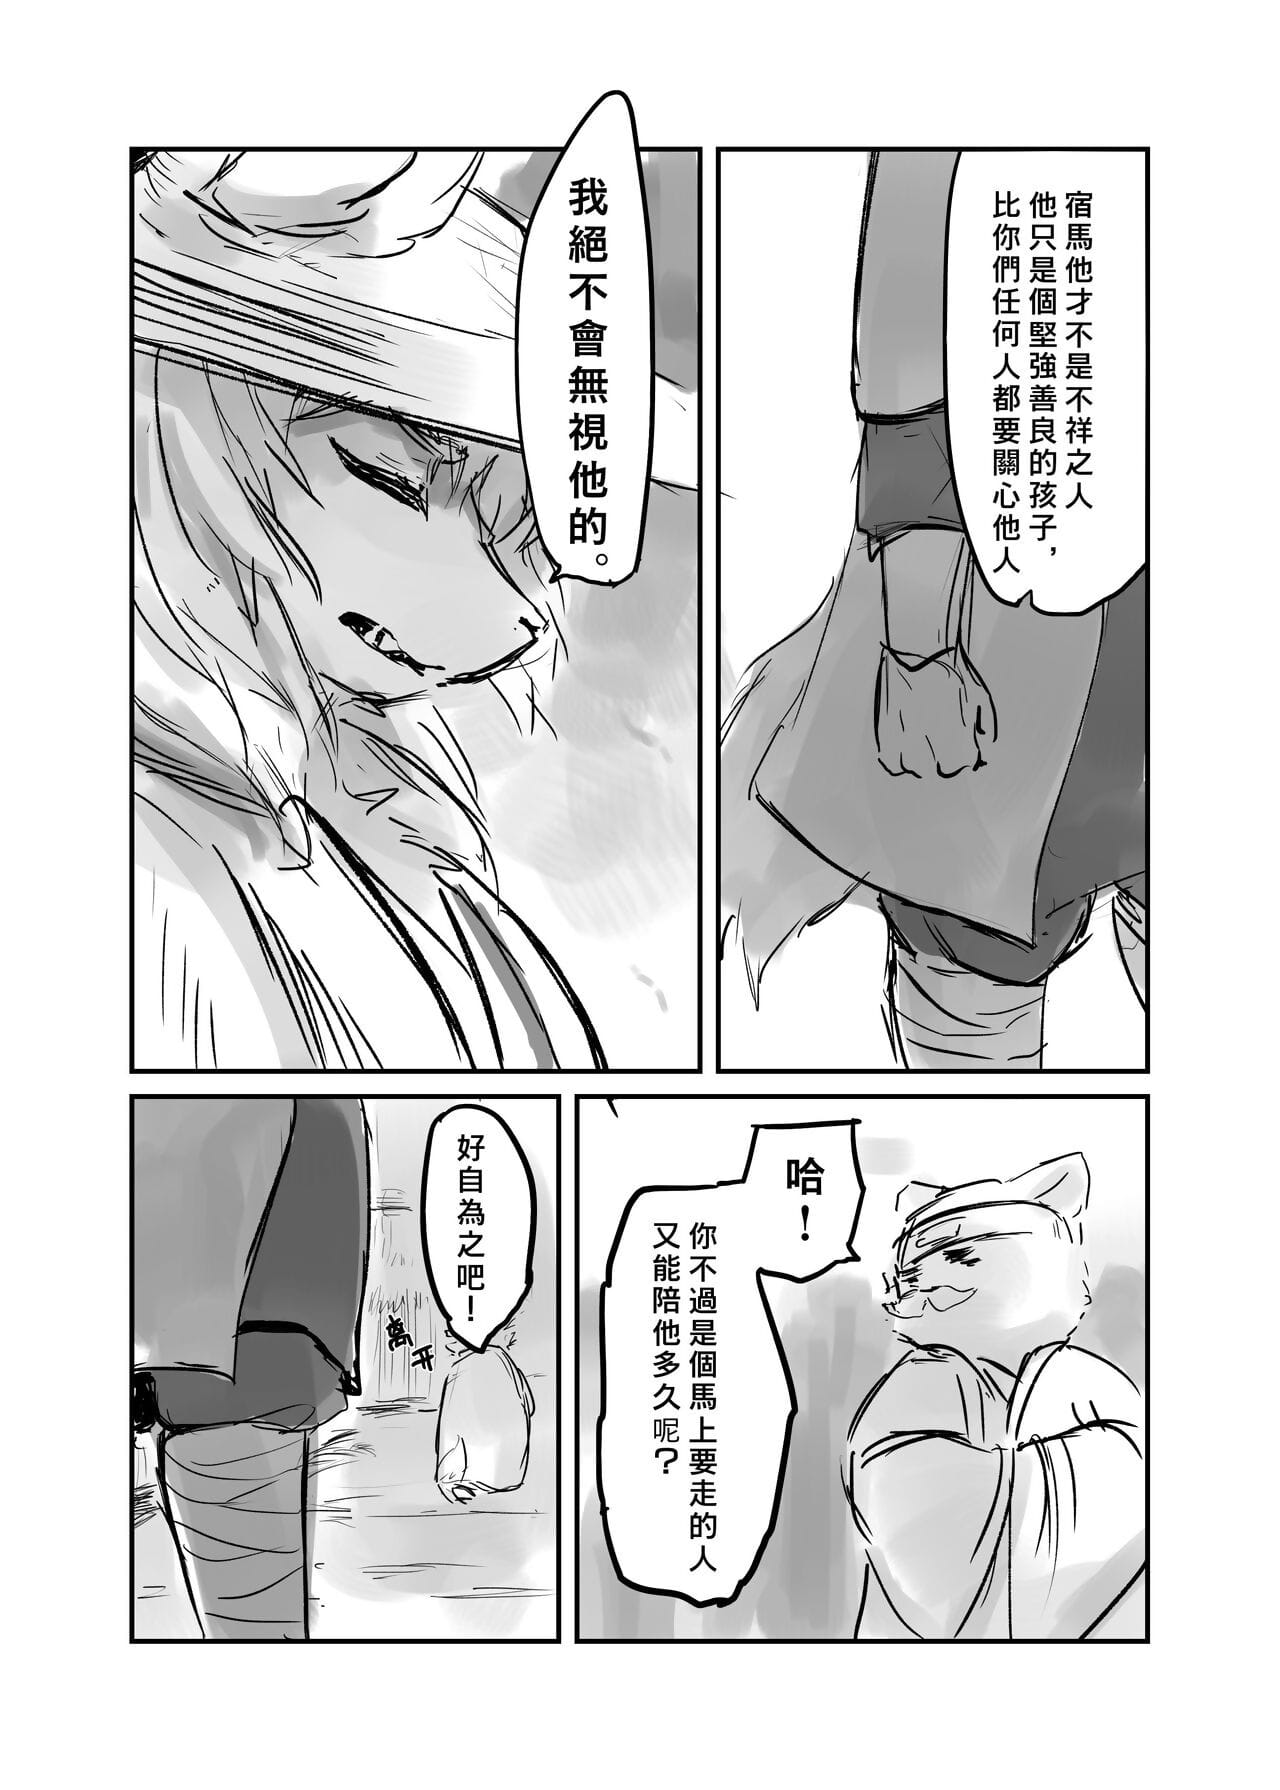 （the visitante 他乡之人 by：鬼流 page 1